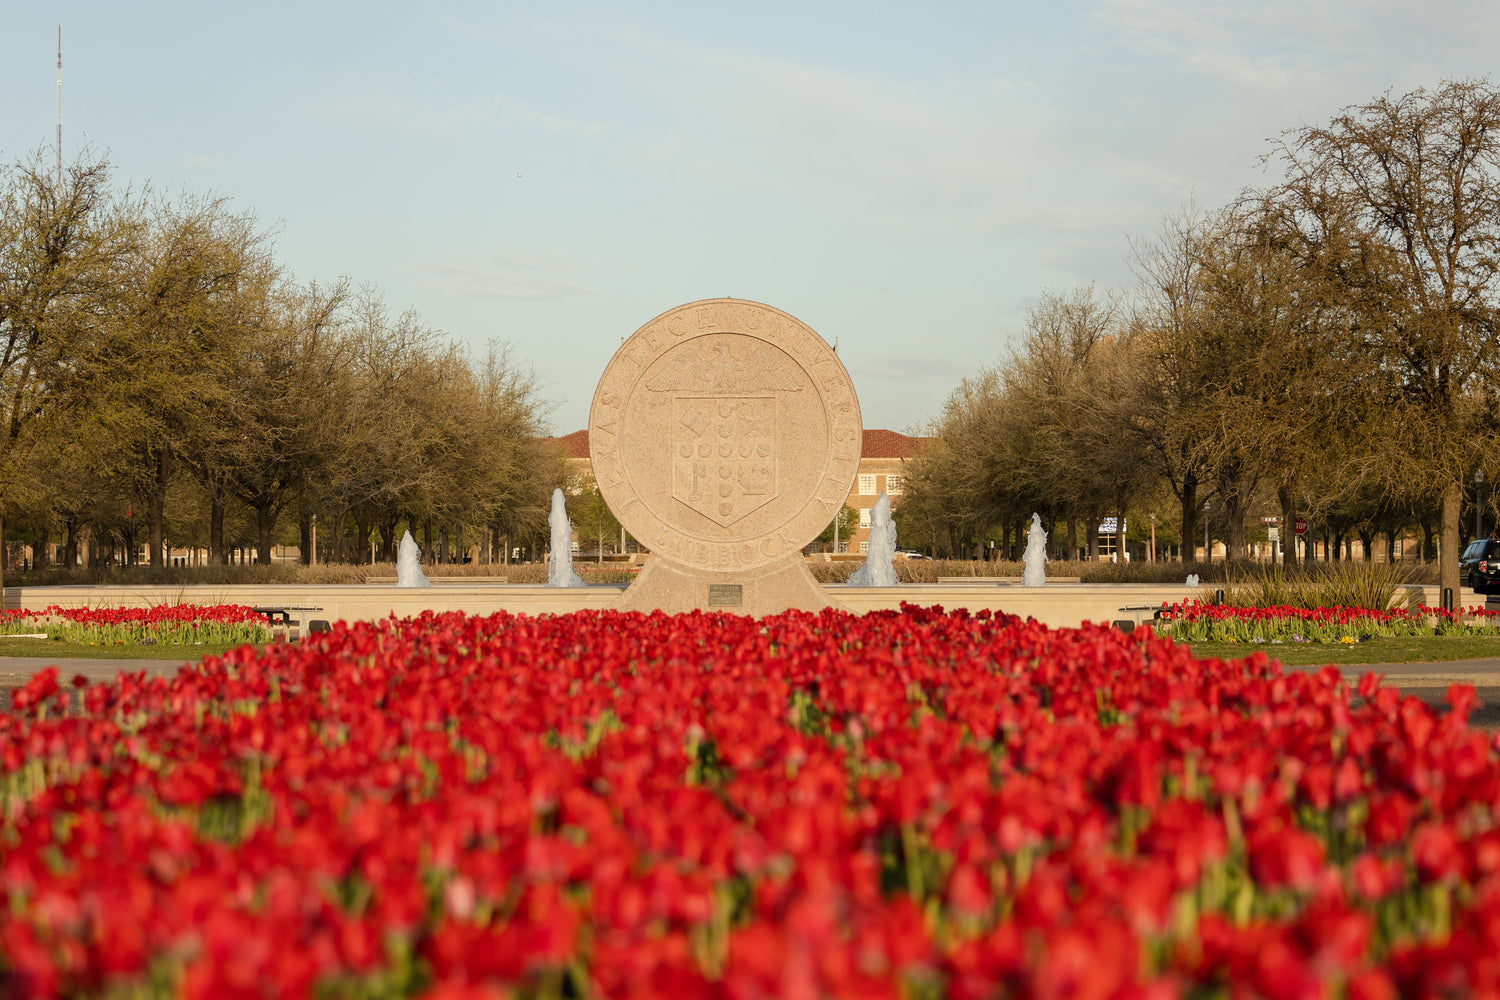 Texas Tech University Seal amongst red tulips in spring.